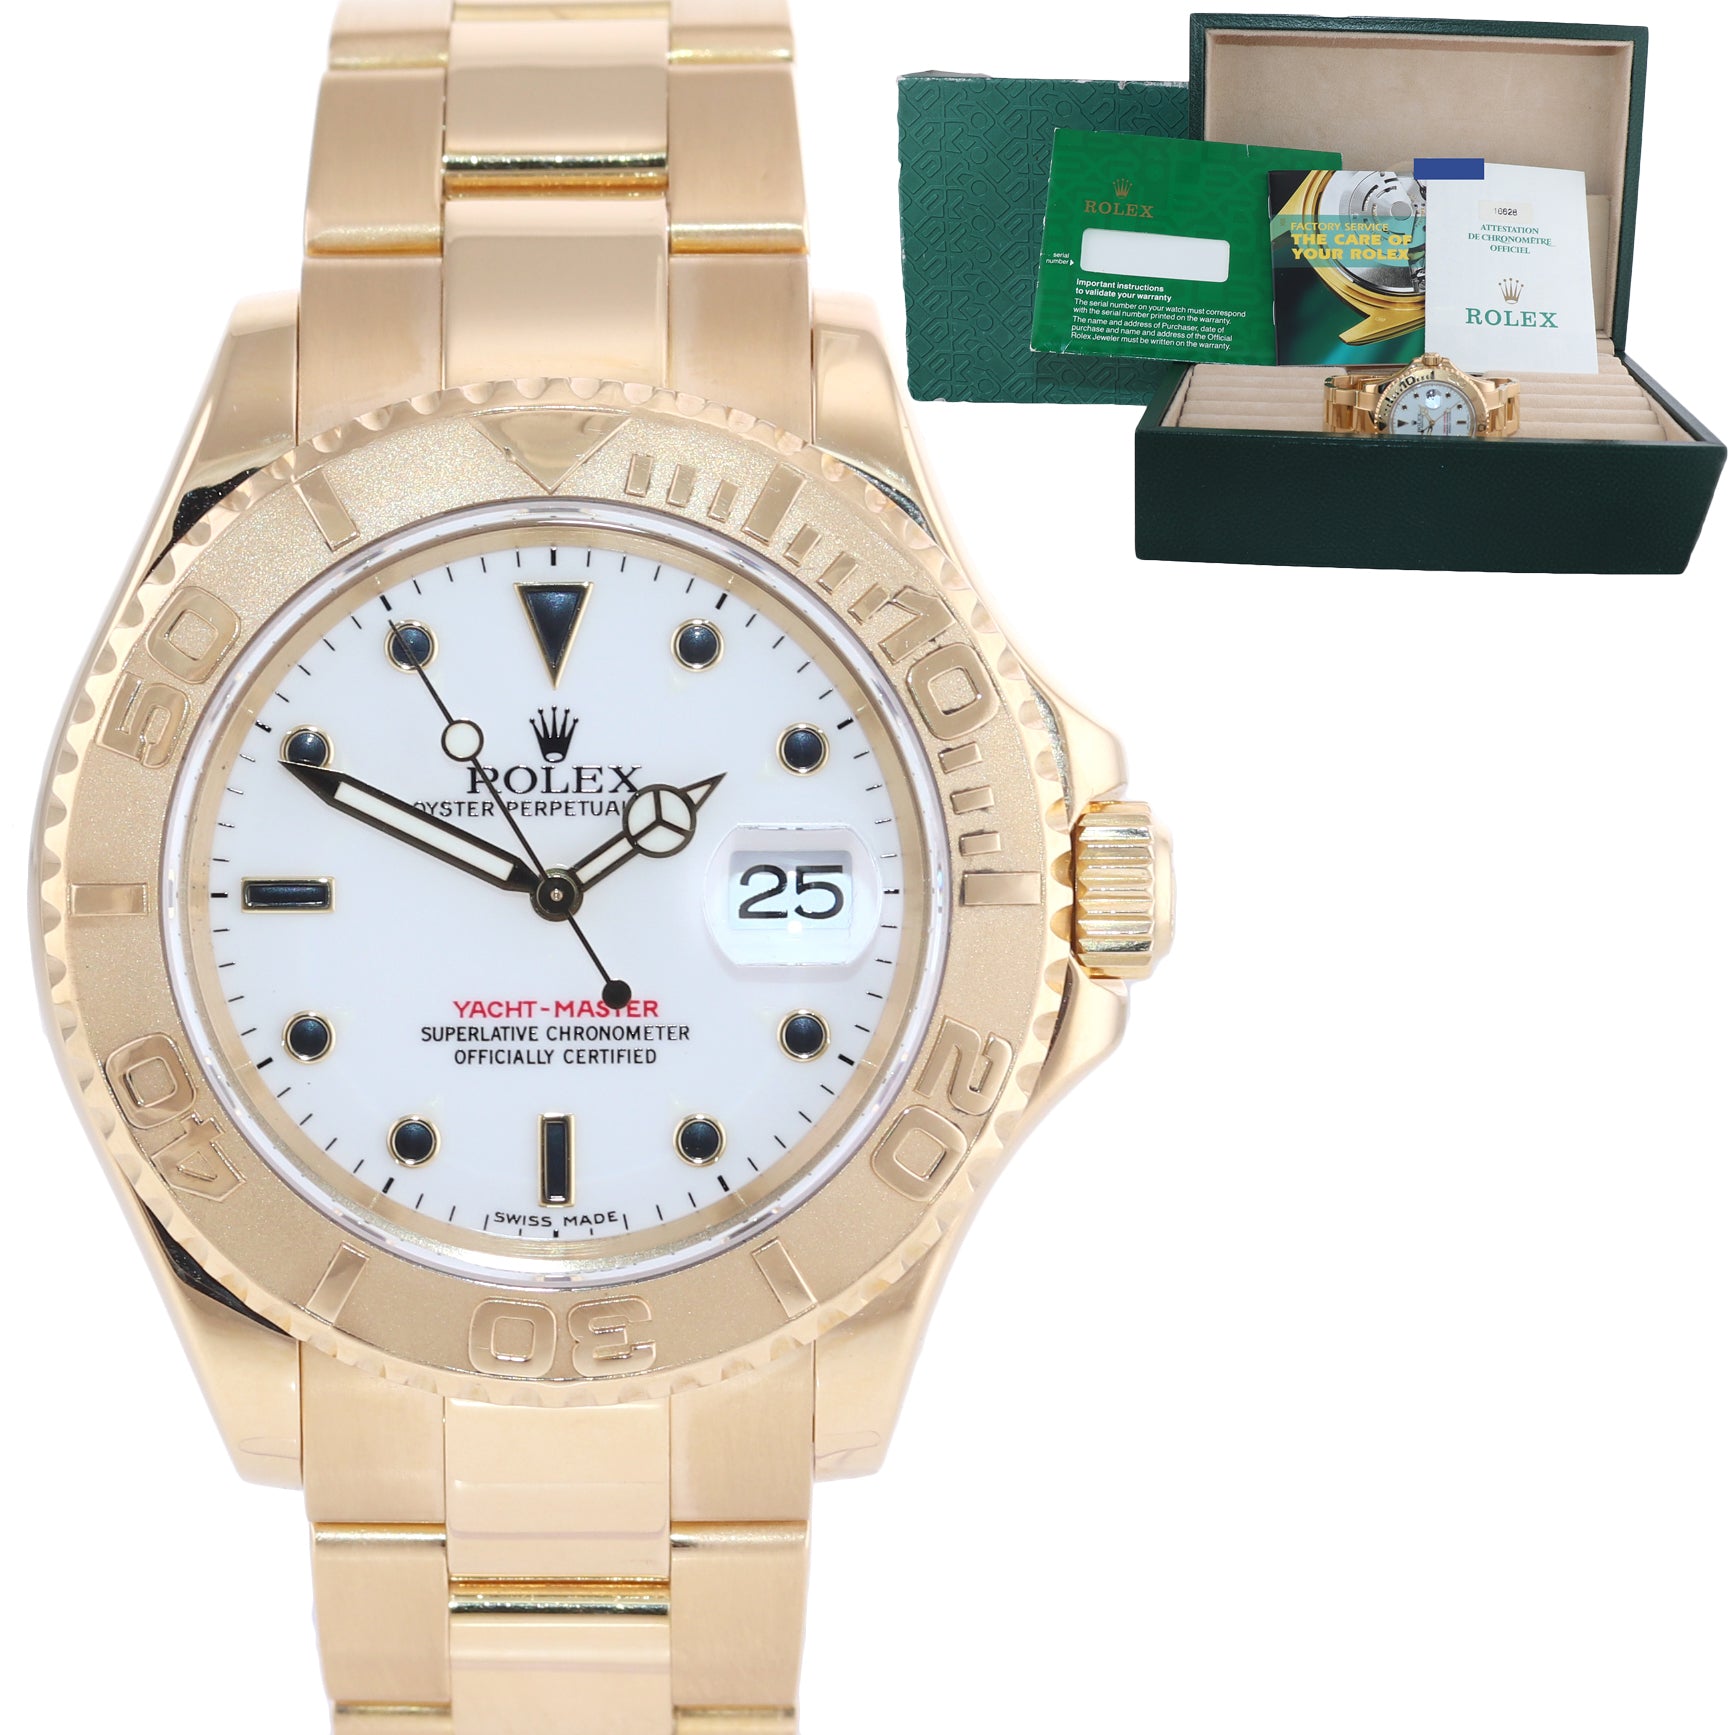 PAPERS Rolex Yacht-Master 18k Yellow Gold White Sapphire 16628 40mm Watch Box